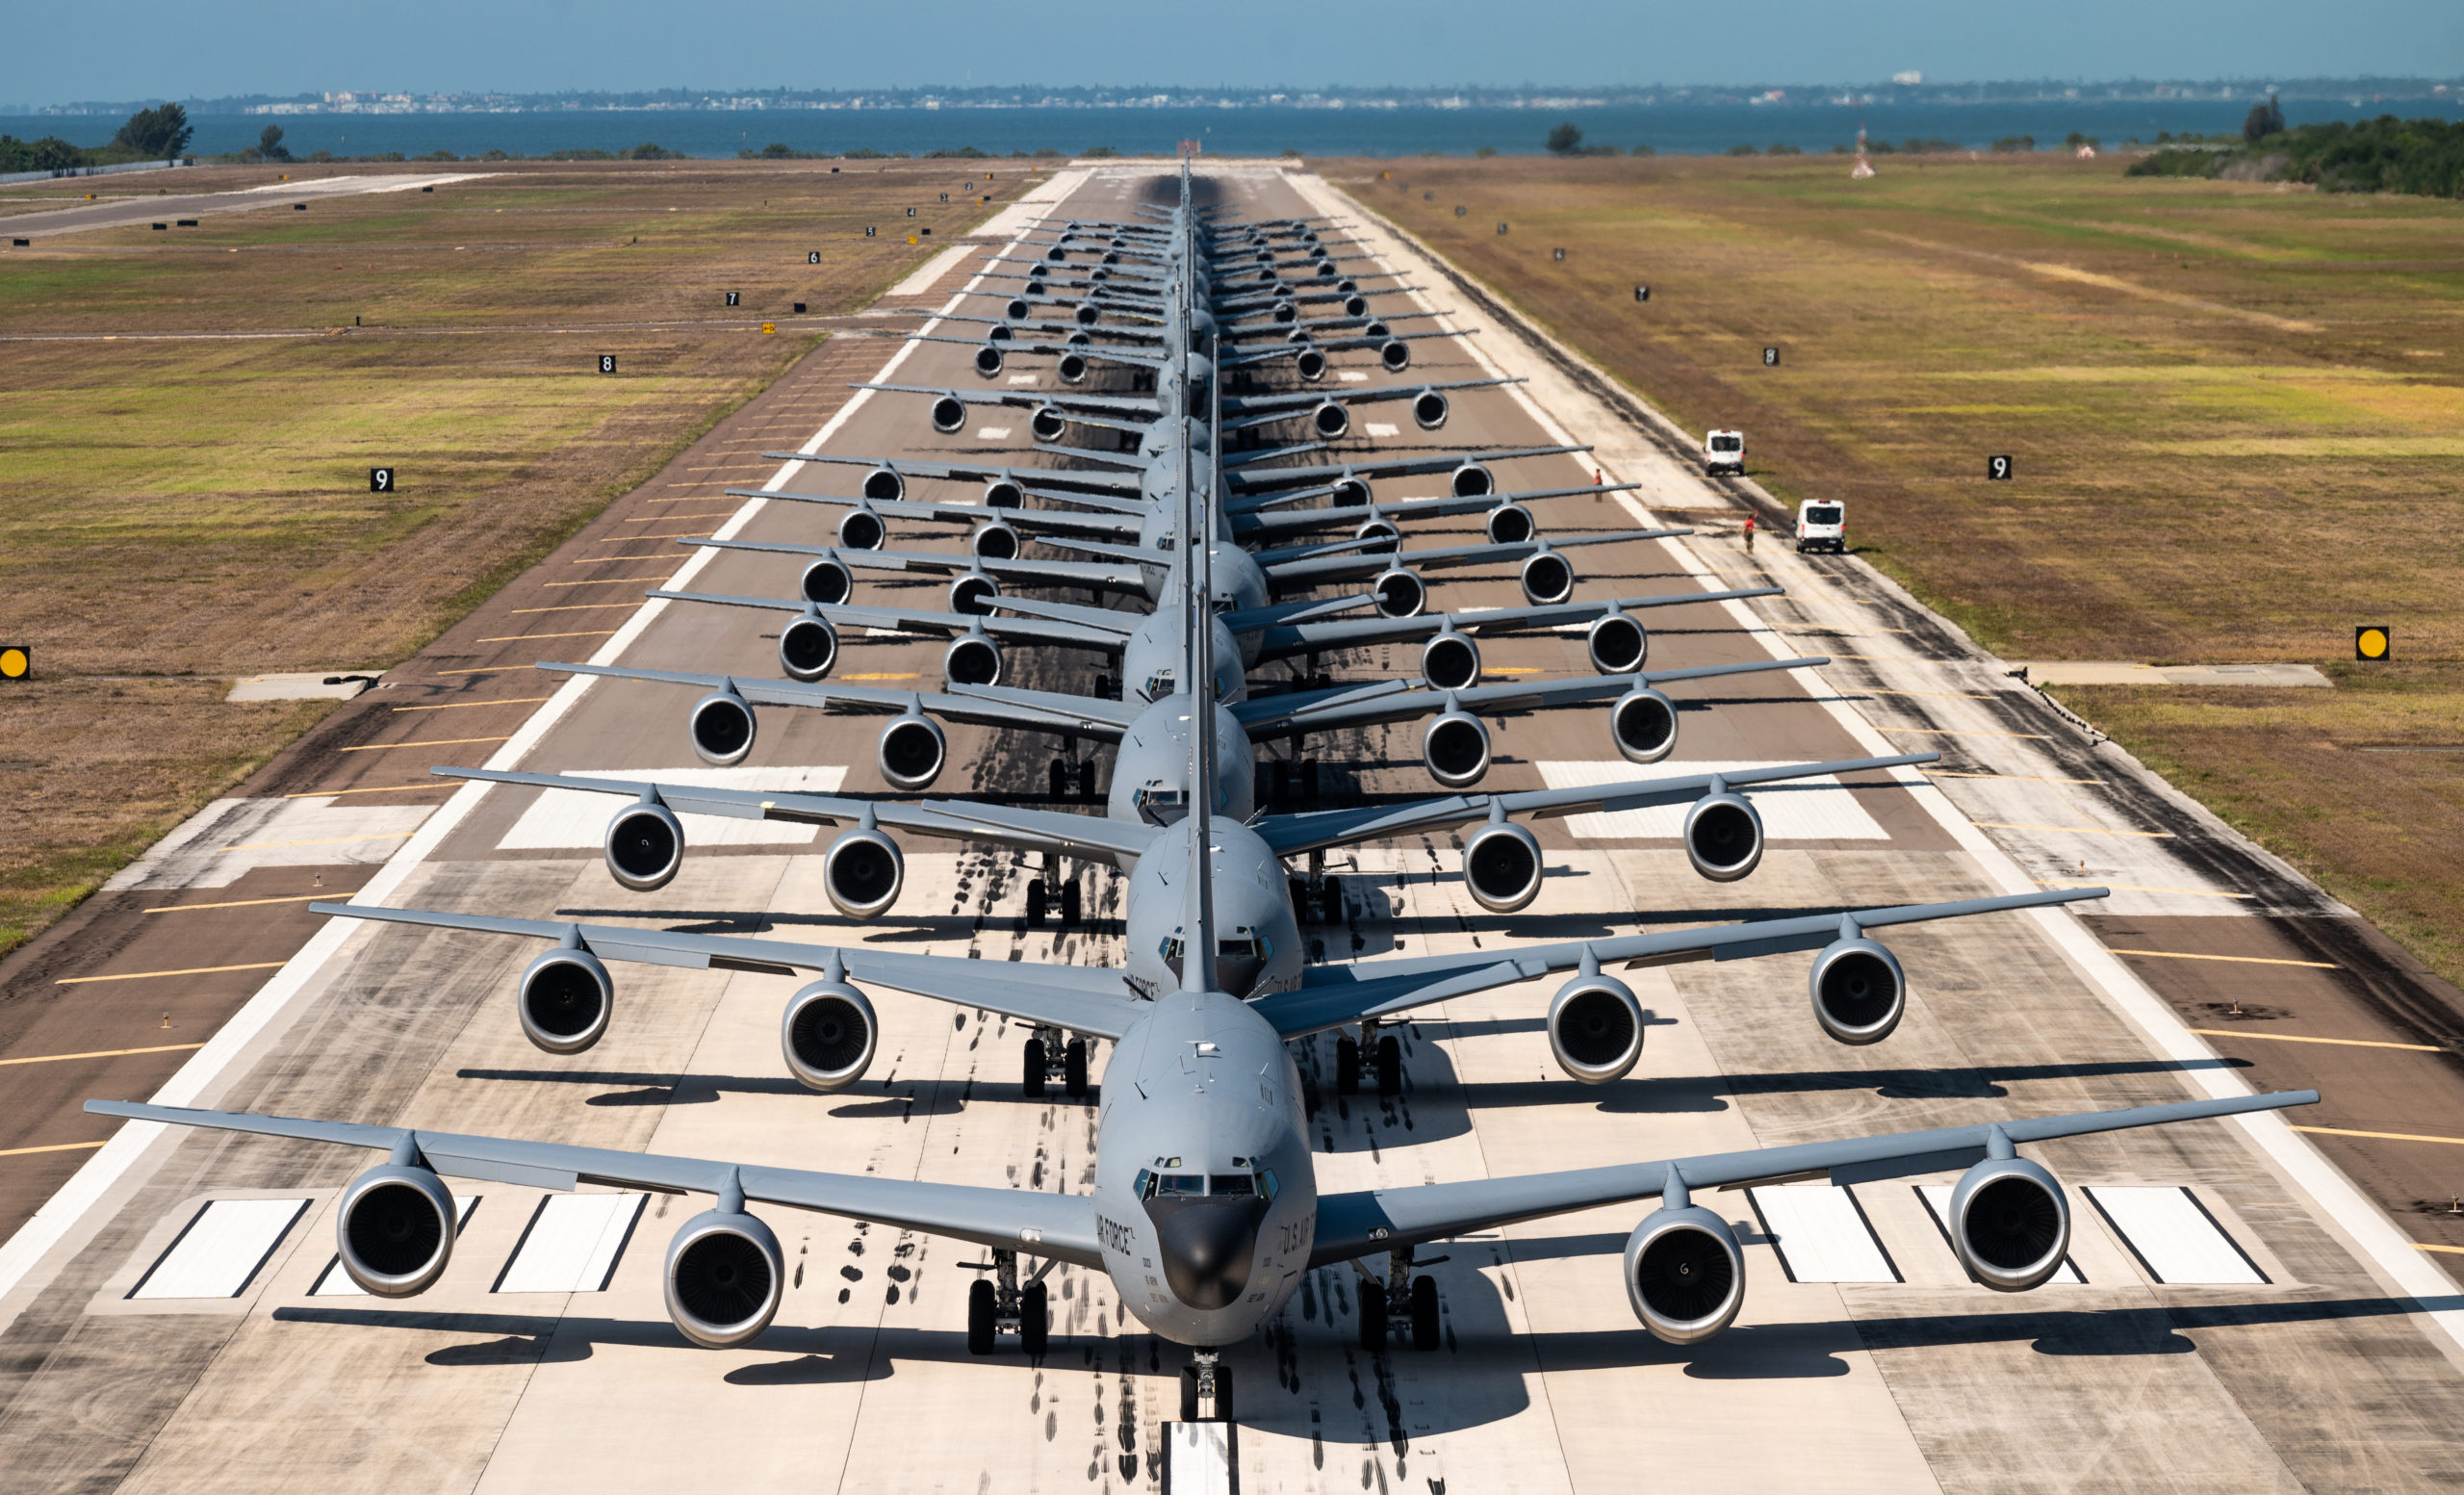 18 KC-135s Line Up at MacDill, as USAF’s Surge in Elephant Walks Continues